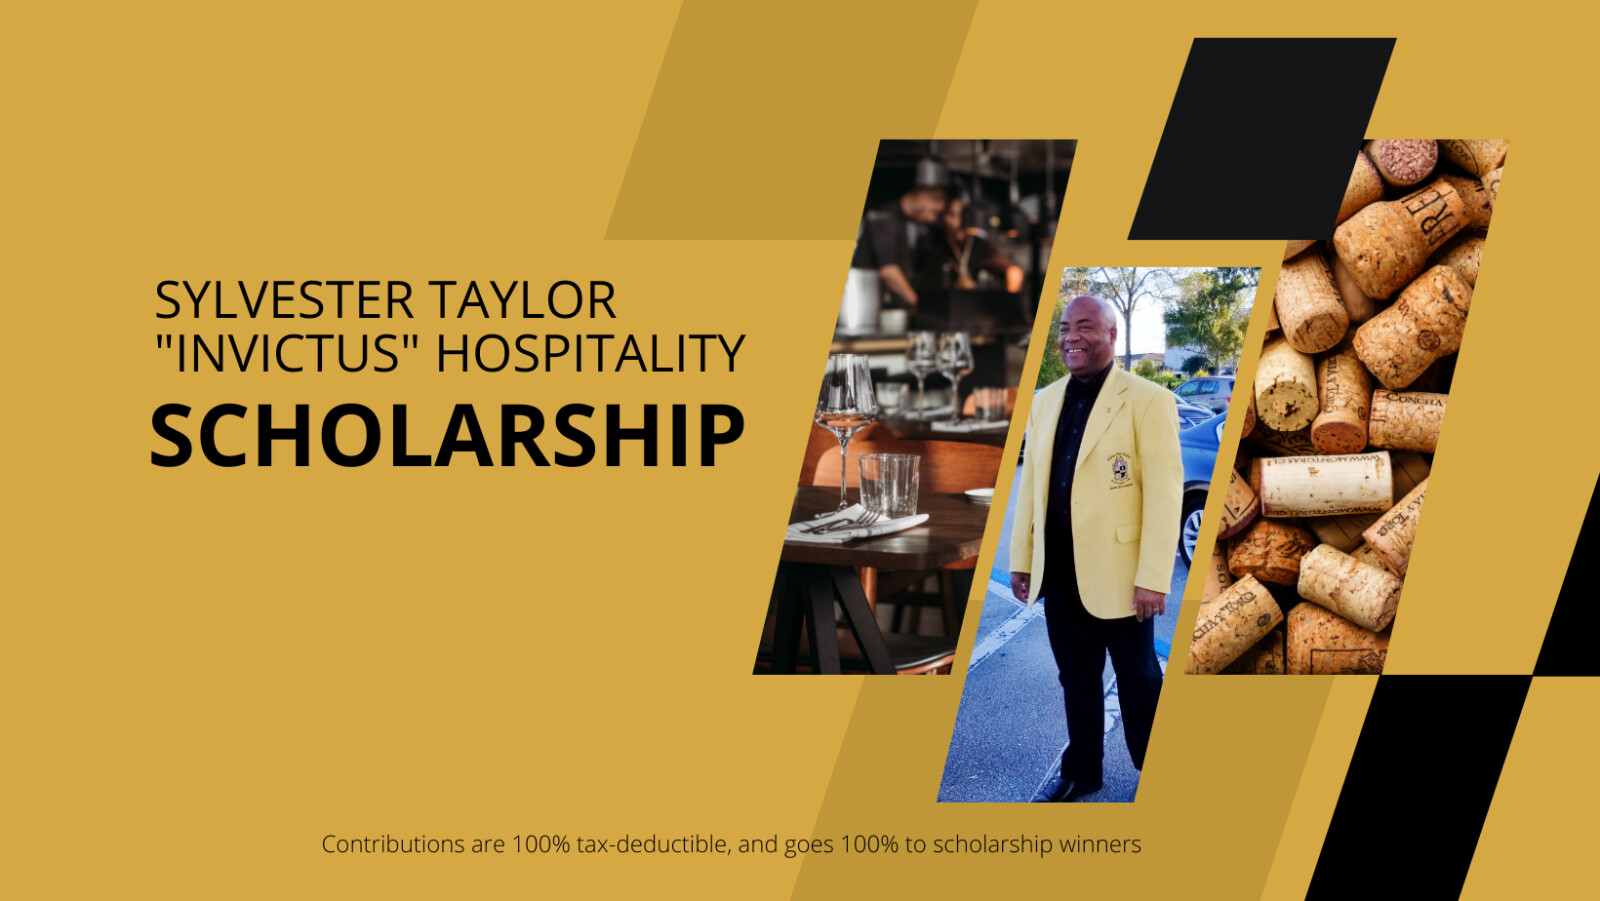 Introducing: The Sylvester Taylor "Invictus" Hospitality Scholarship